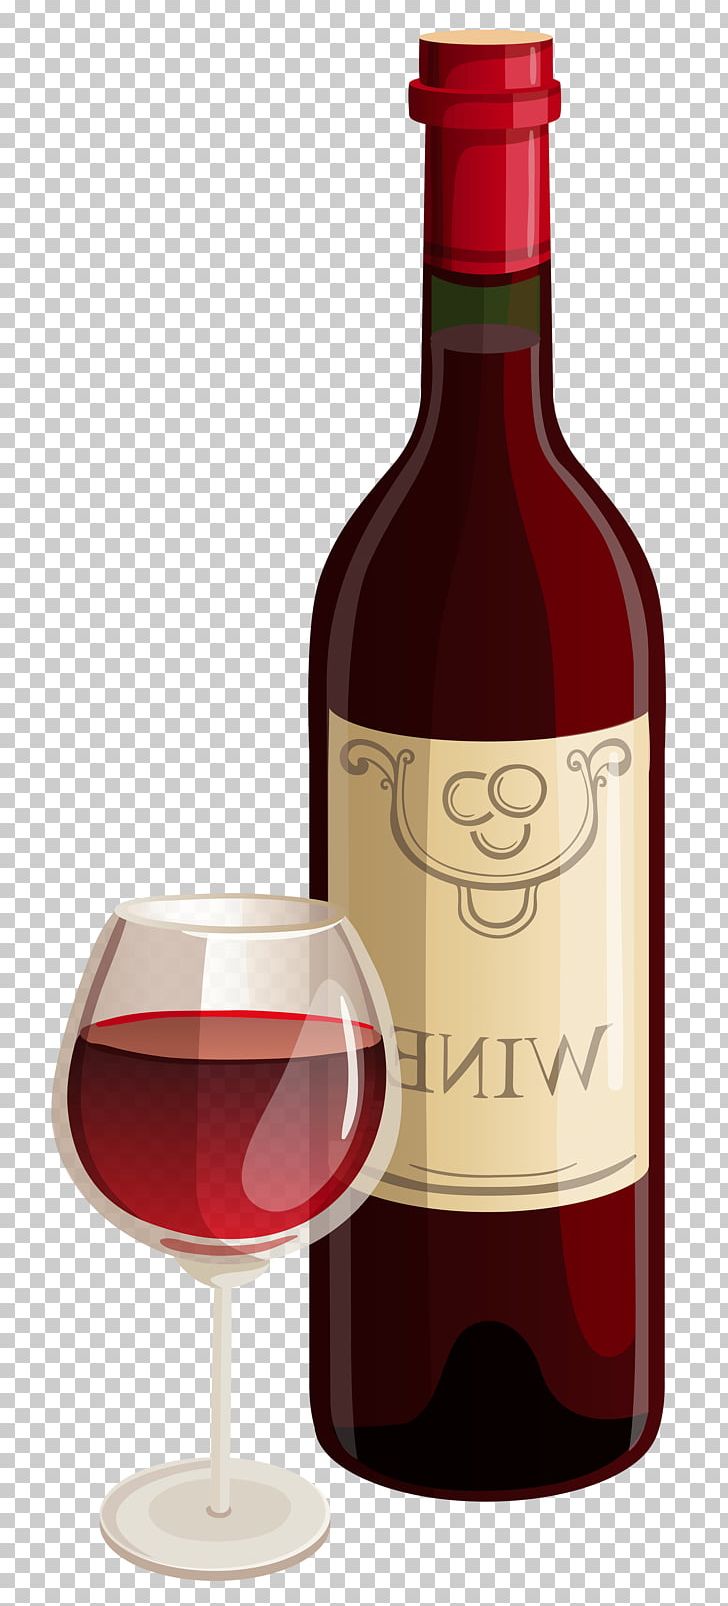 Red Wine Wine Glass Wine Cocktail Dessert Wine PNG, Clipart, Birthday, Bottle, Bottle Clipart, Champagne, Coloring Pages Free PNG Download